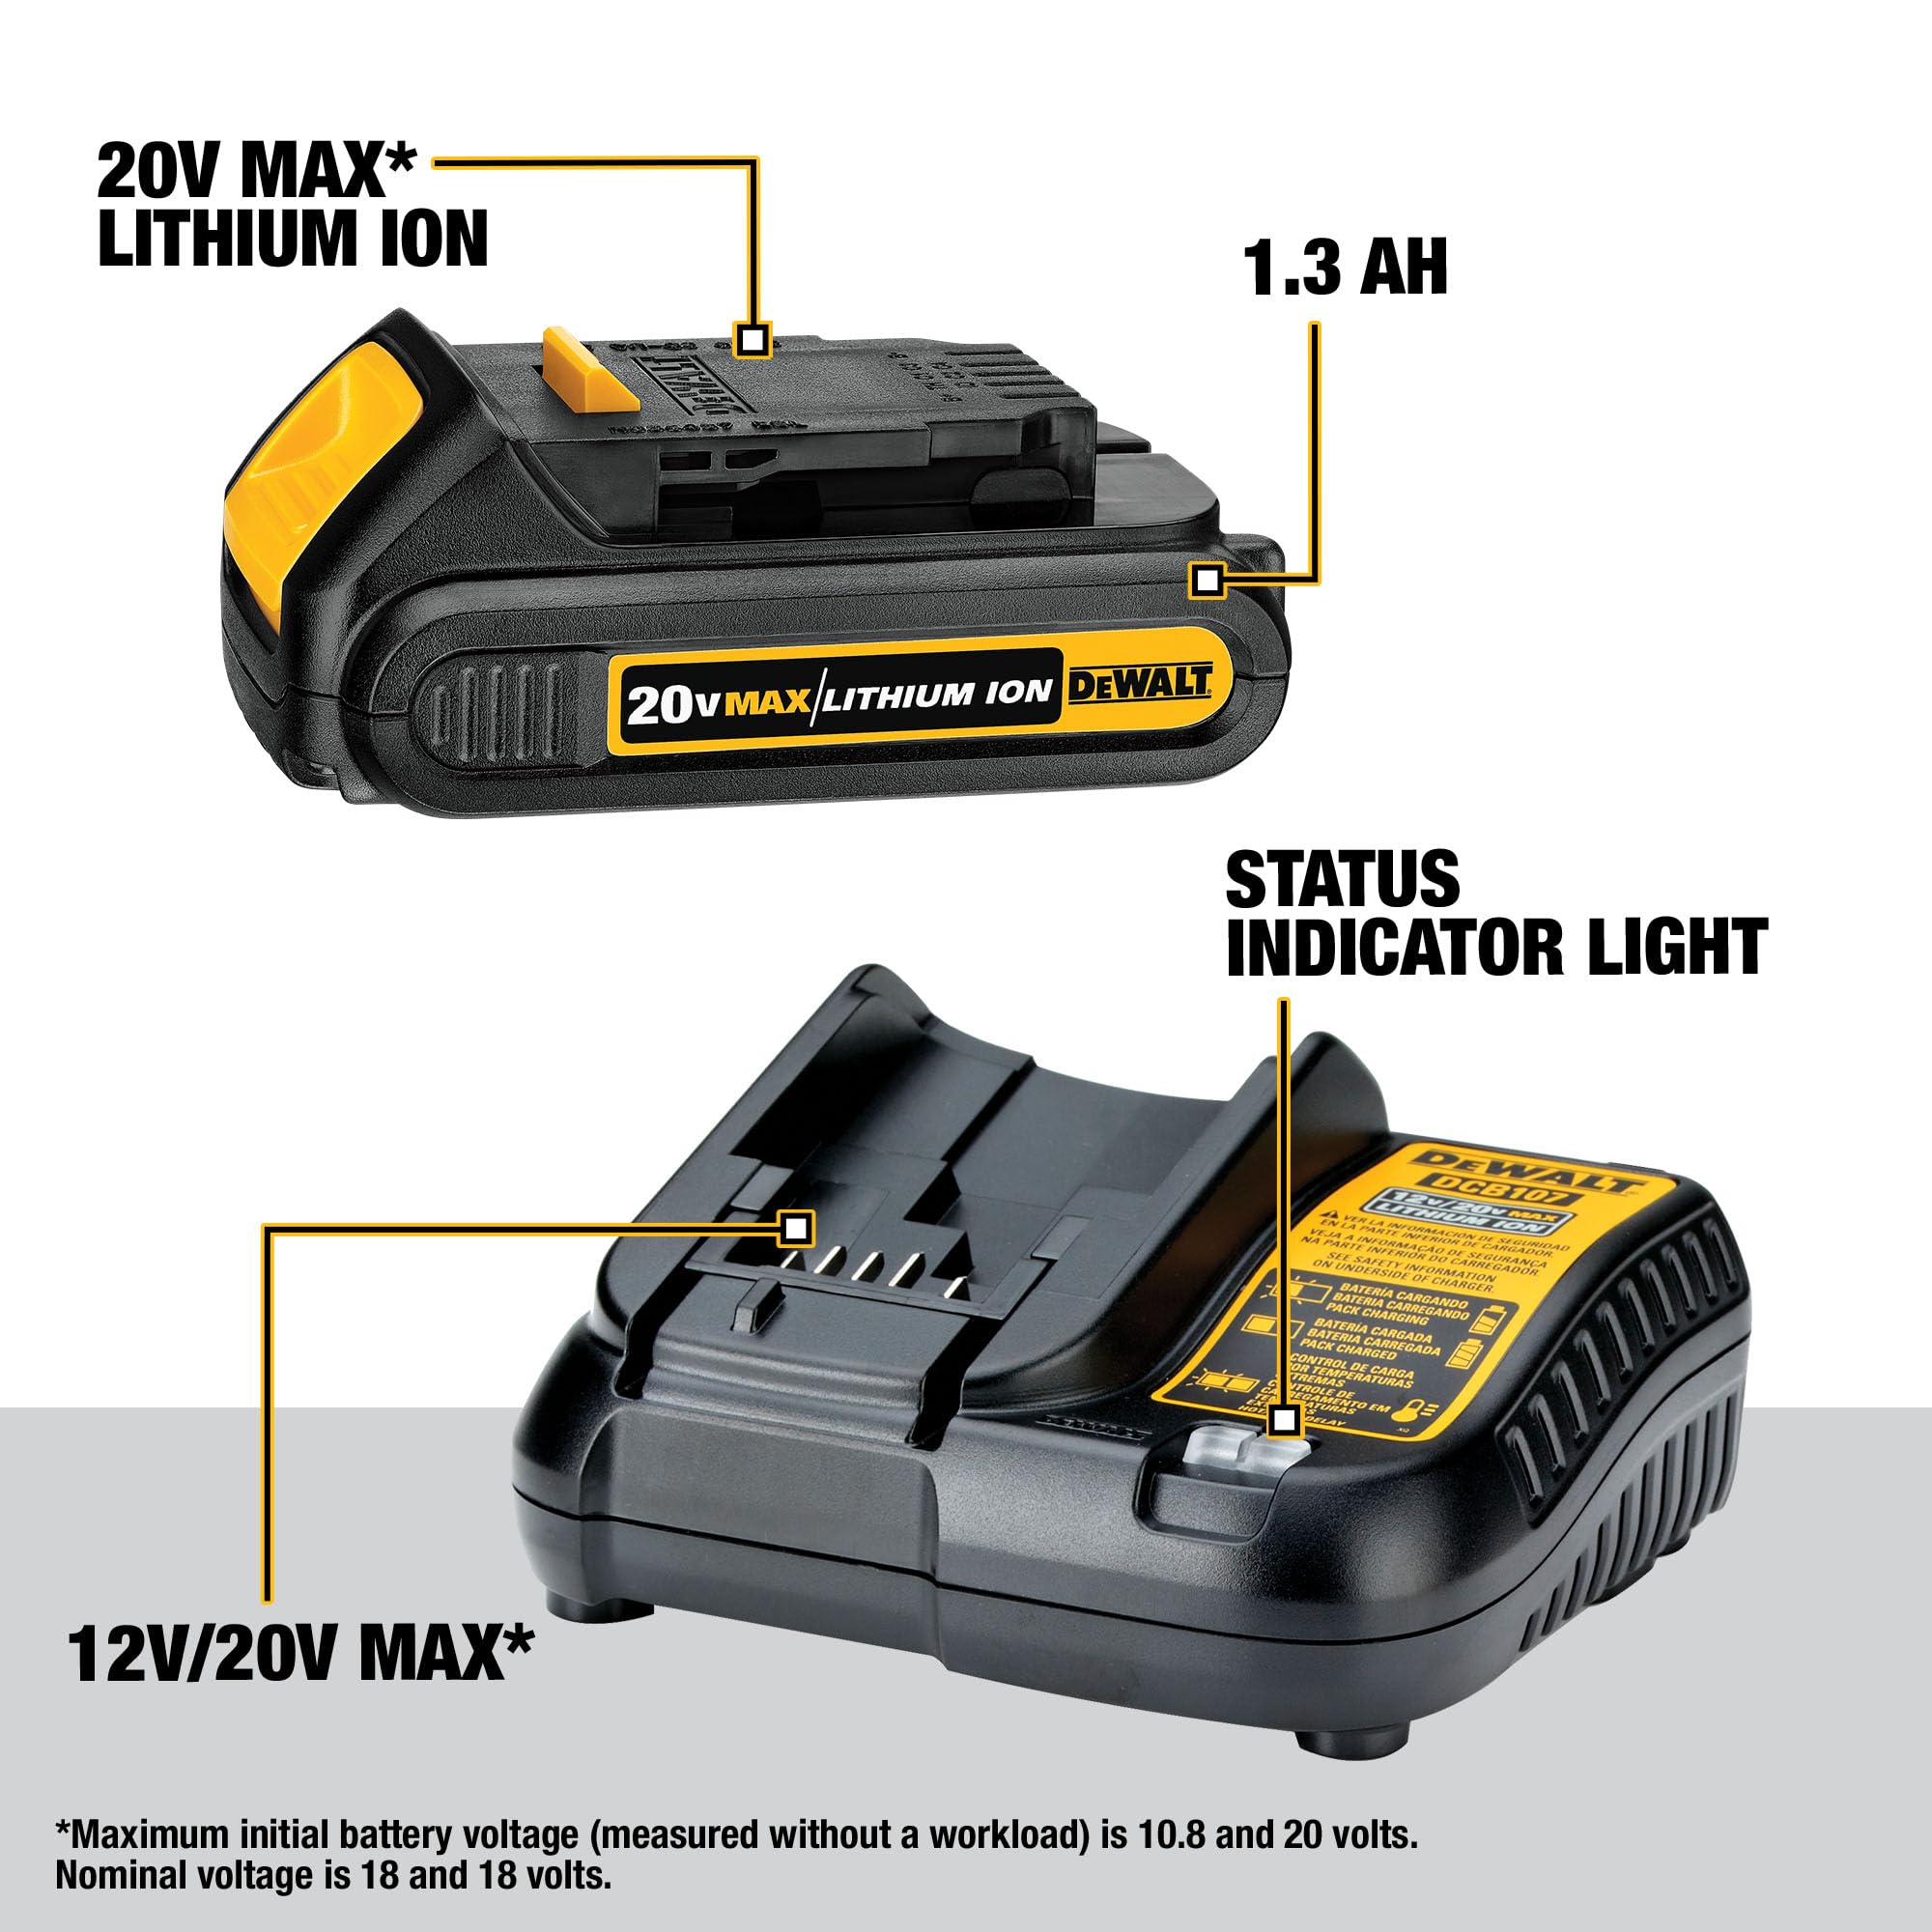 DEWALT 20V MAX Power Tool Combo Kit, Cordless Power Tool Set, 2-Tool with 2 Batteries and Charger Included (DCK277D2)